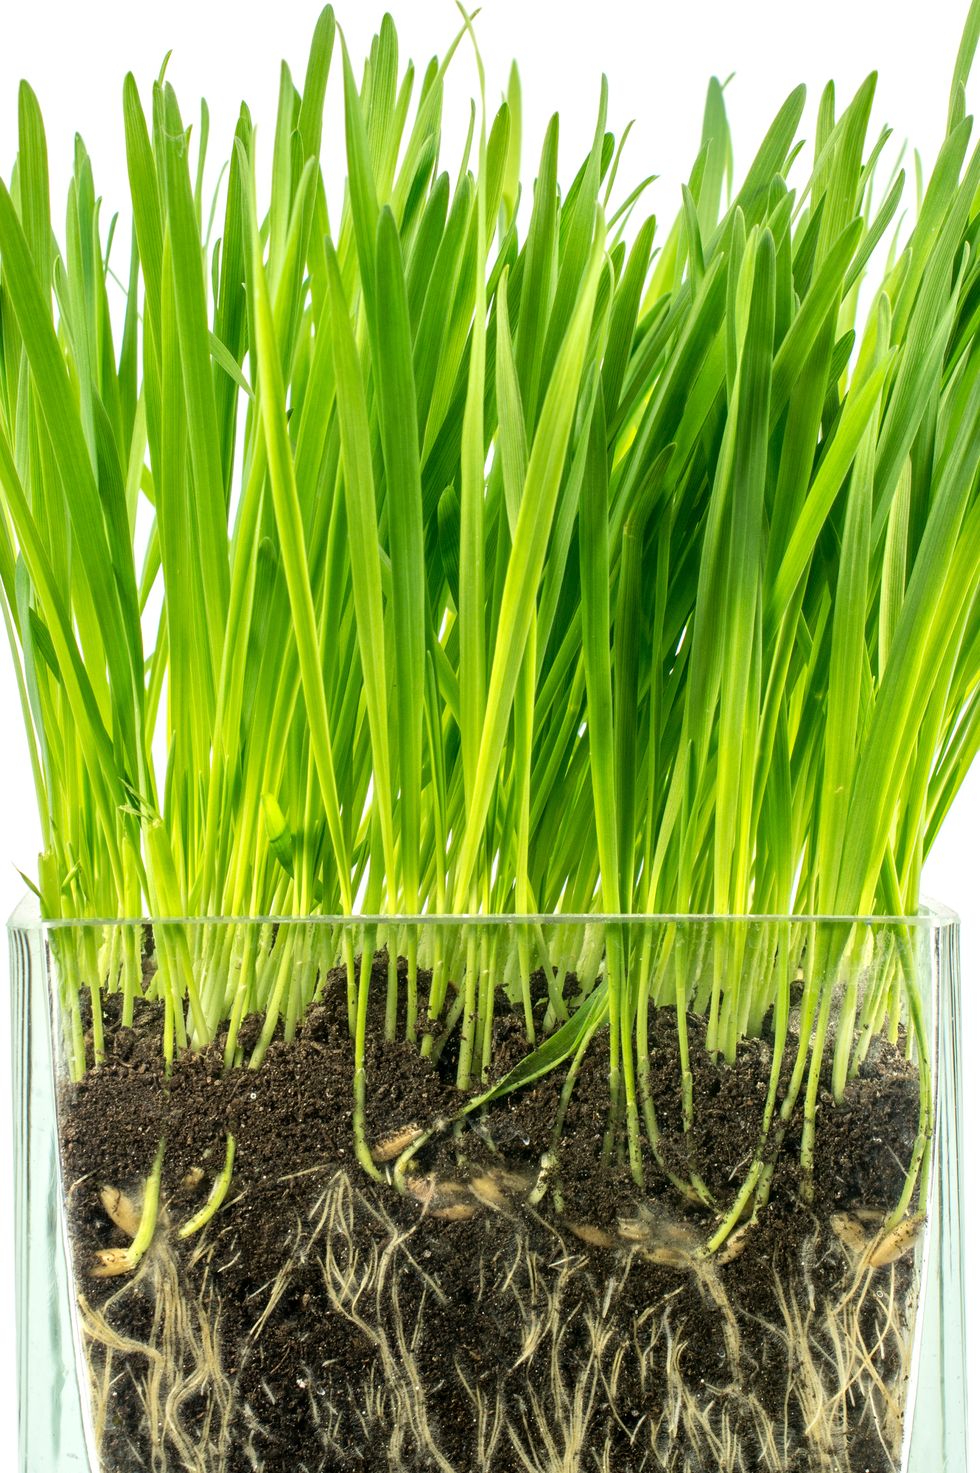 Cat grass in a glass container on a white background